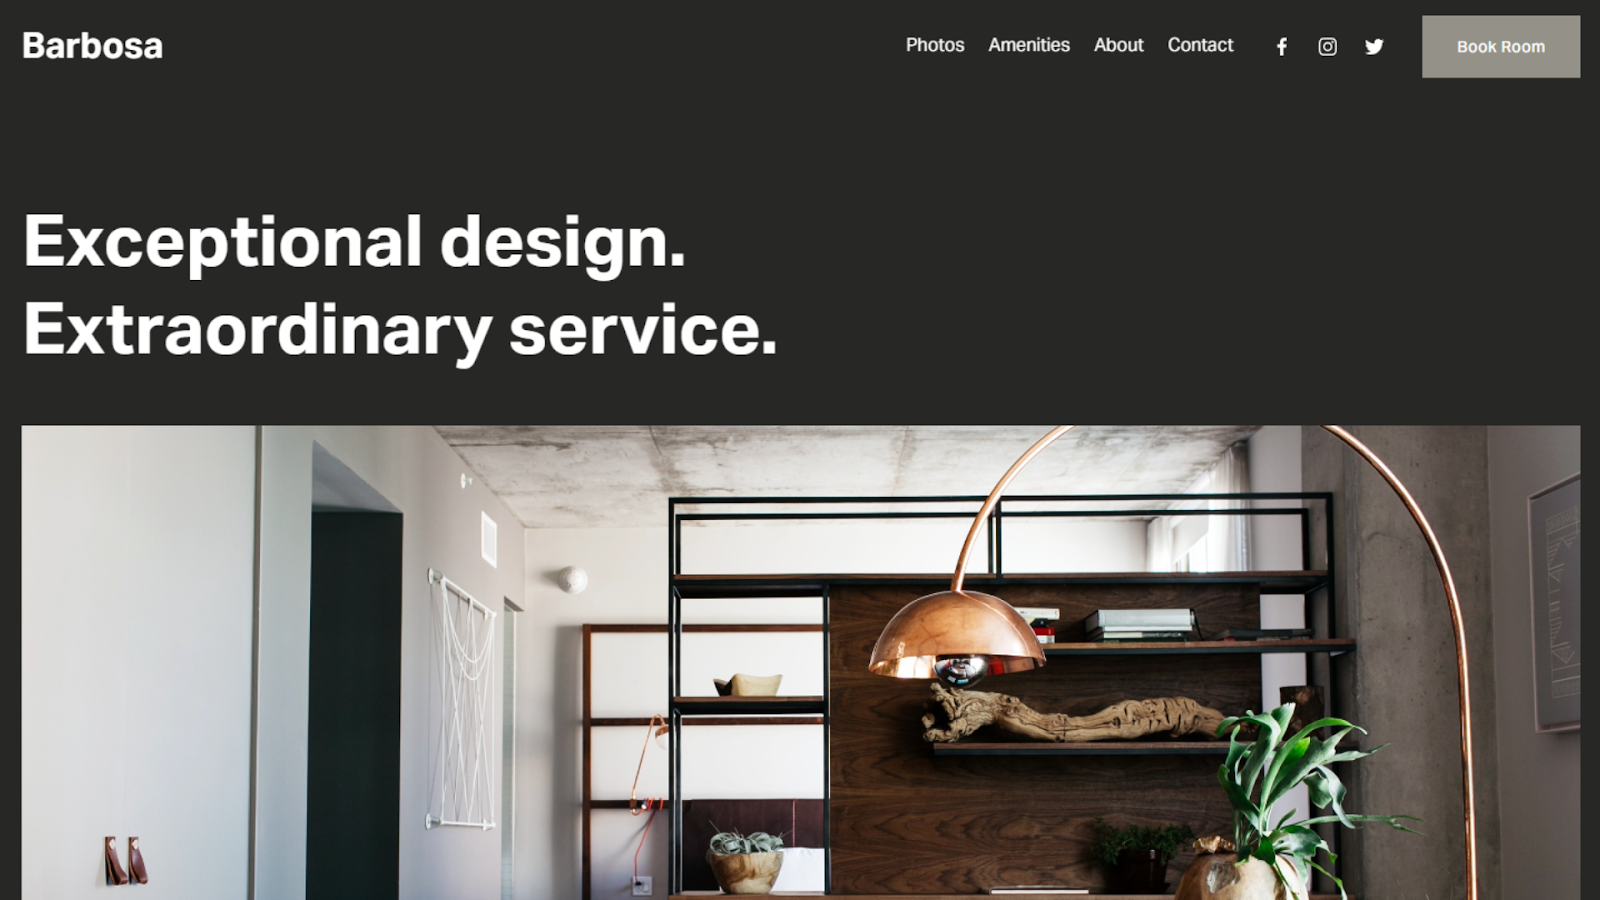 Squarespace template for churches - Barbosa template